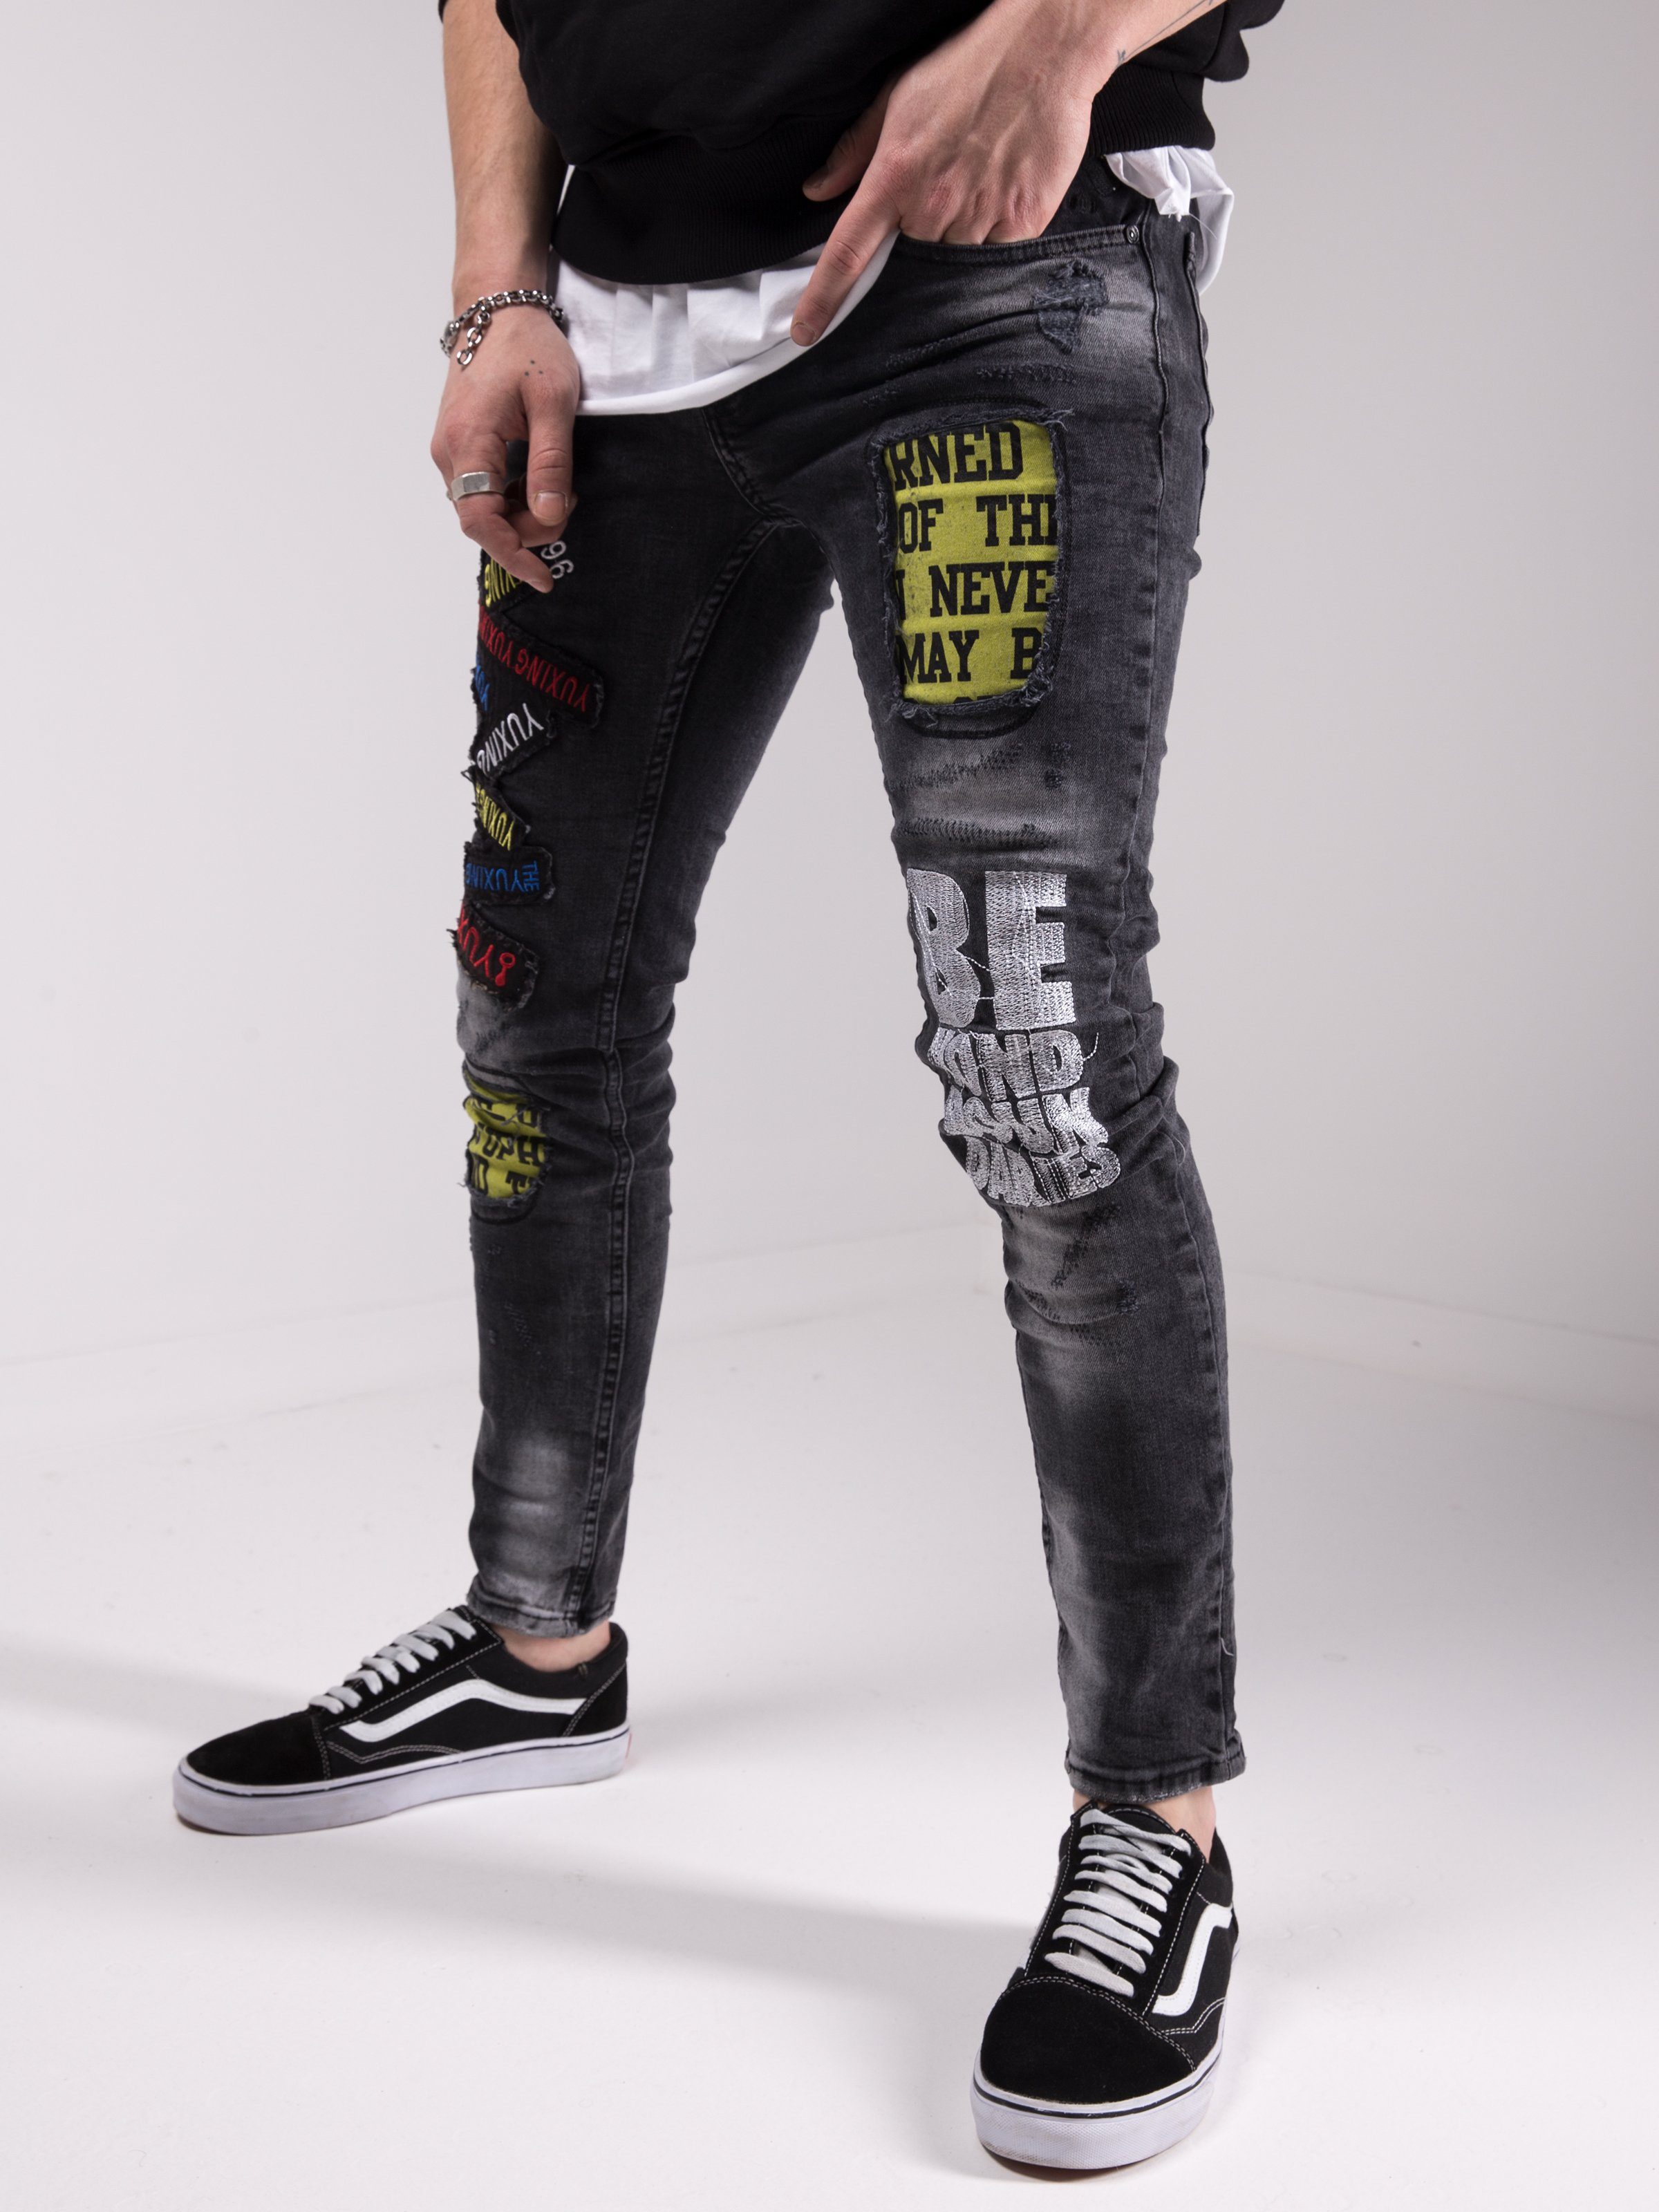 A man wearing a pair of Savage Secret jeans with patches on them.